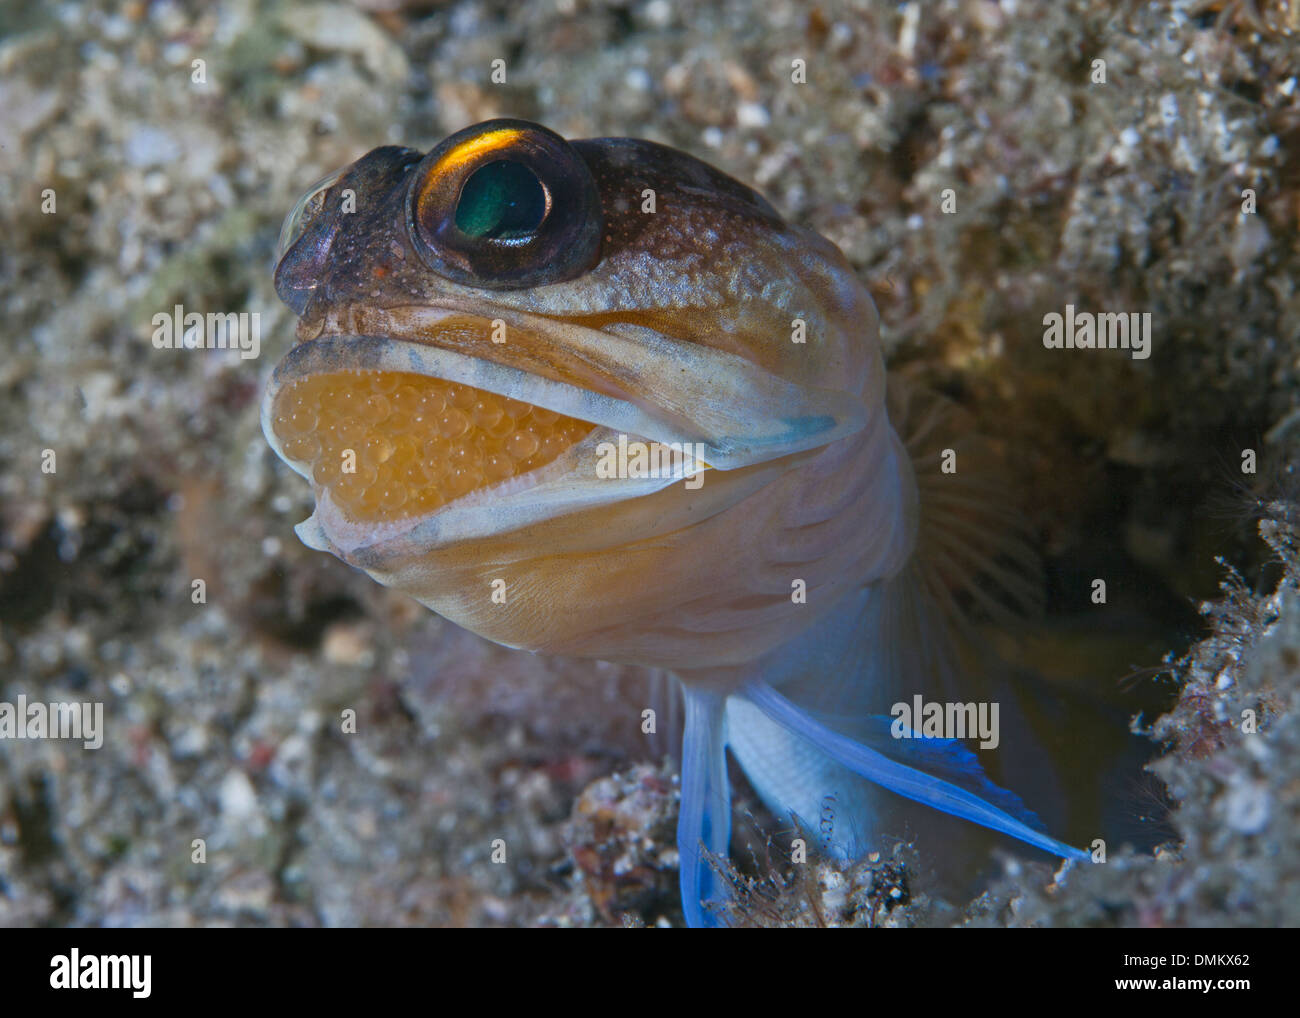 Macro image of jawfish (Opistognathus sp.) incubating eggs in its mouth. Lembeh Straits, Indonesia. Stock Photo